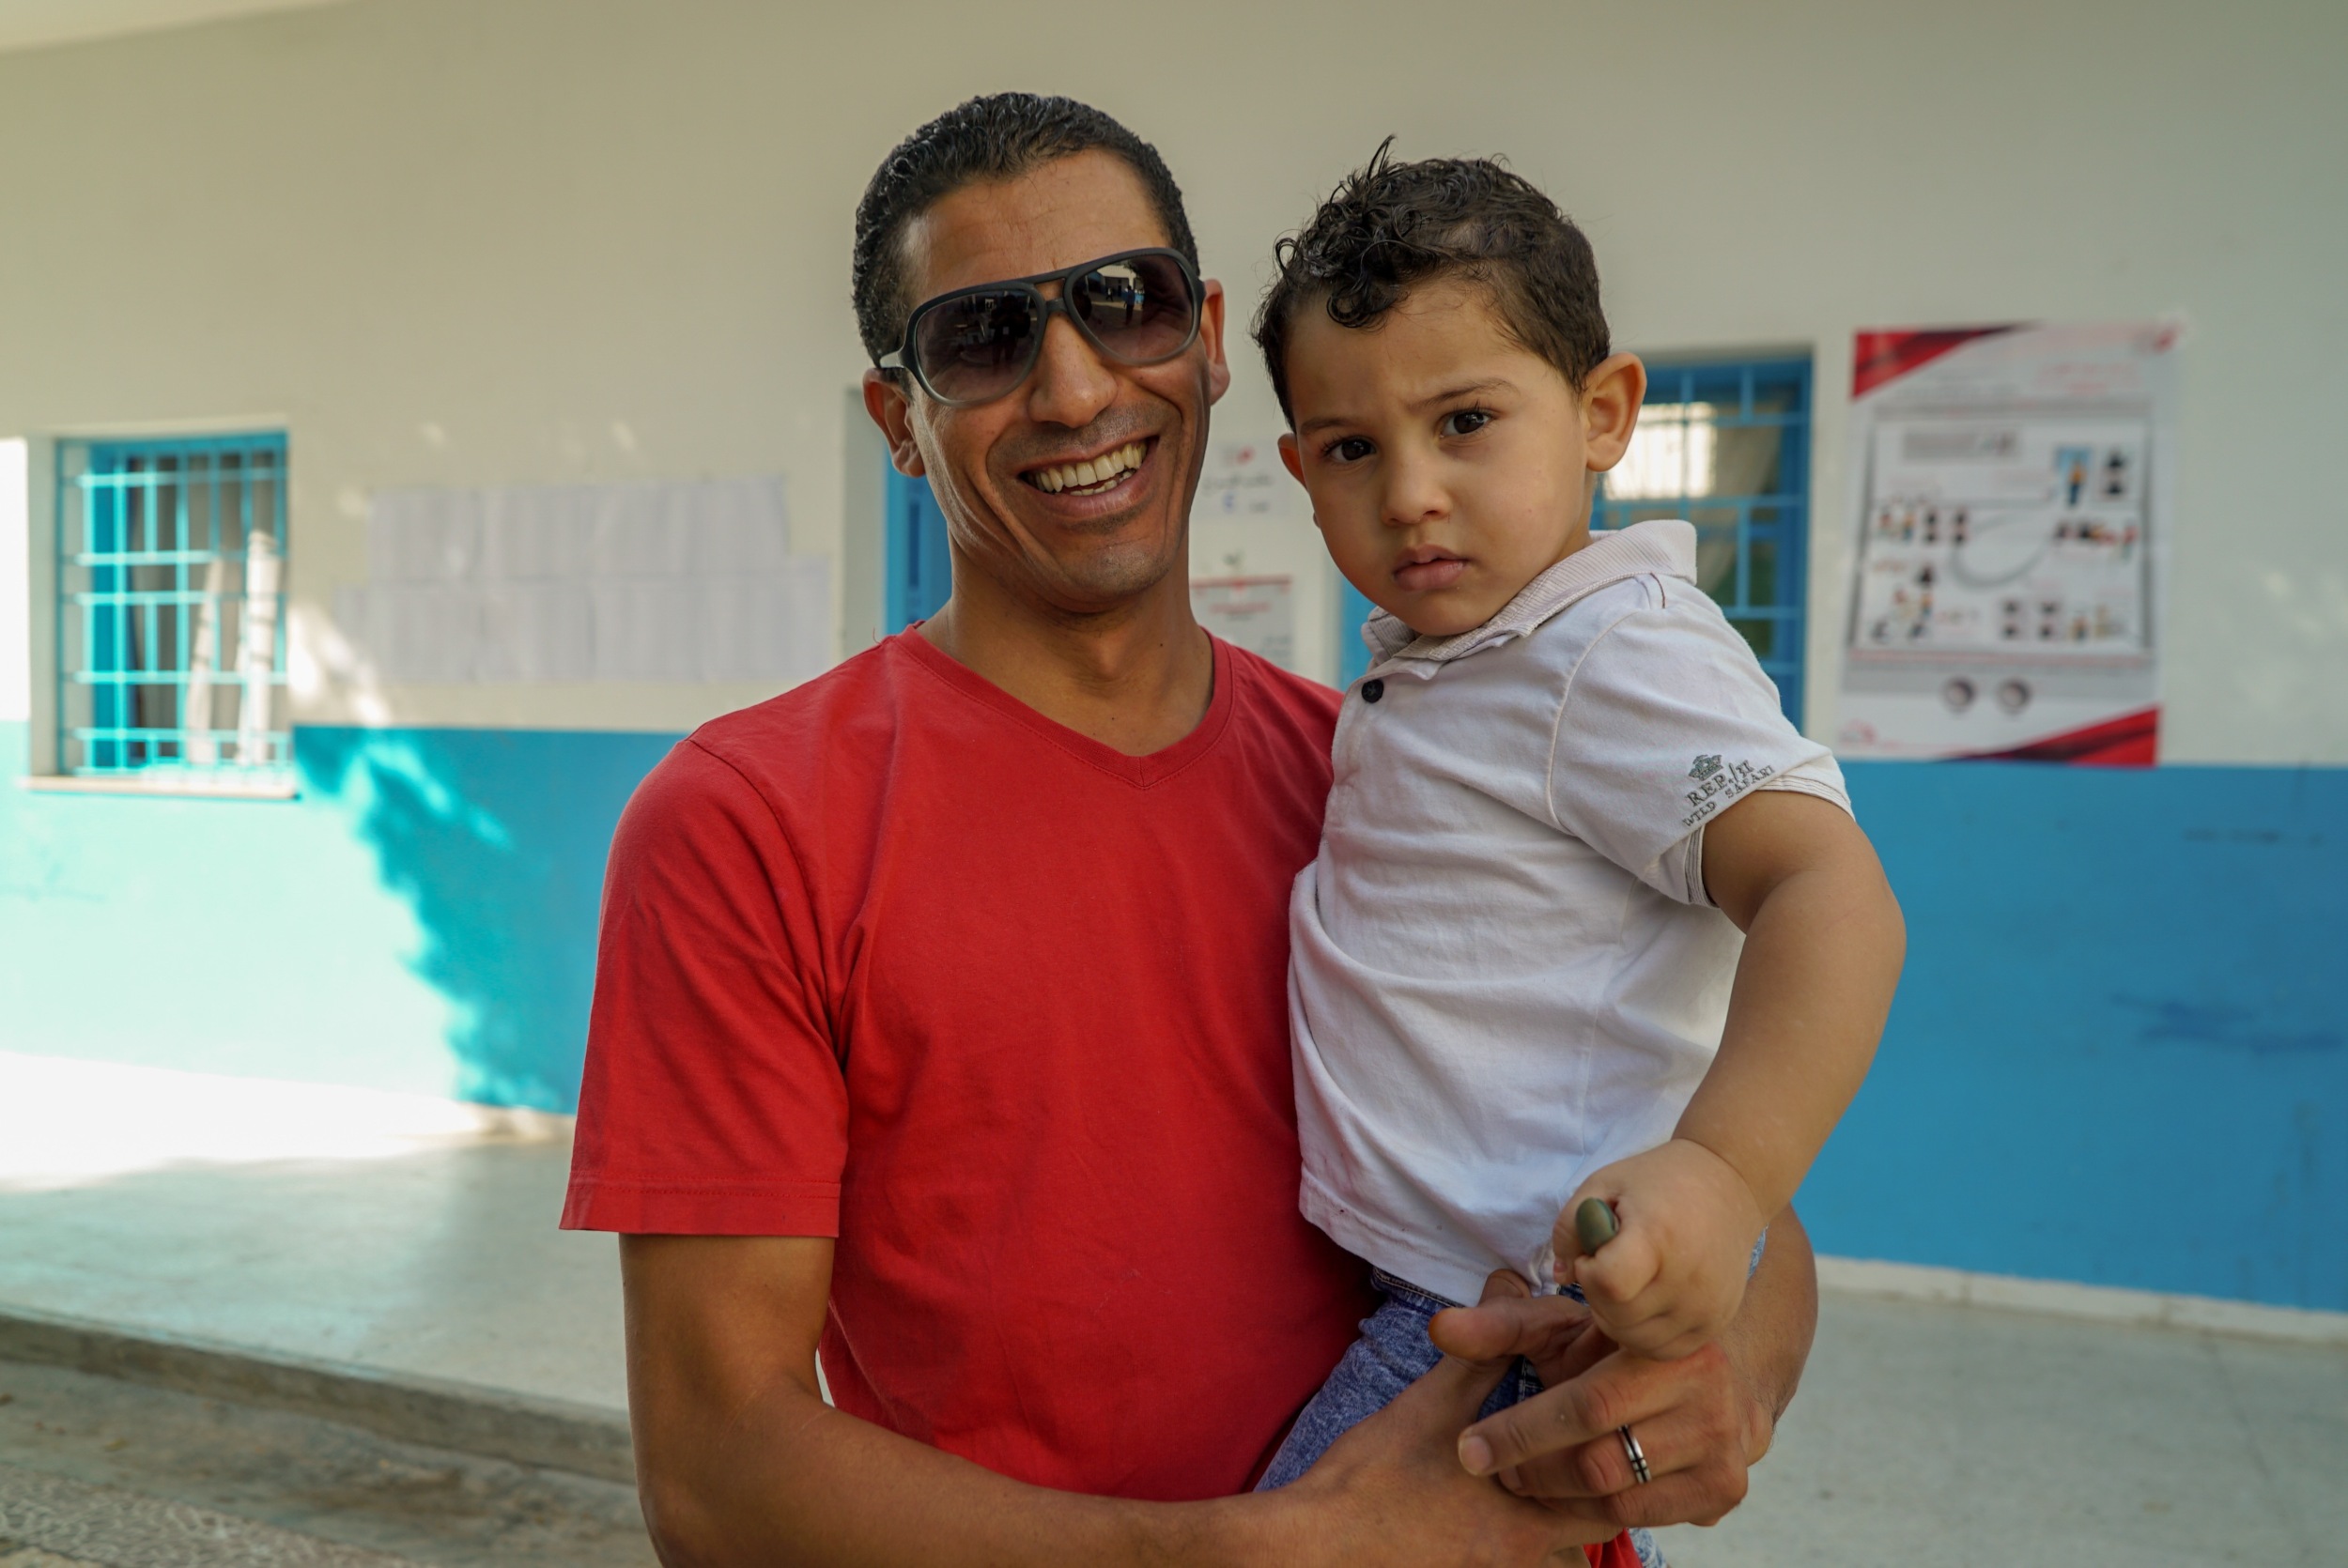 “We are hopeful that better things will come,” says Taher Weshtati, who brought his young son with him to vote (MEE/Faisal Edroos)